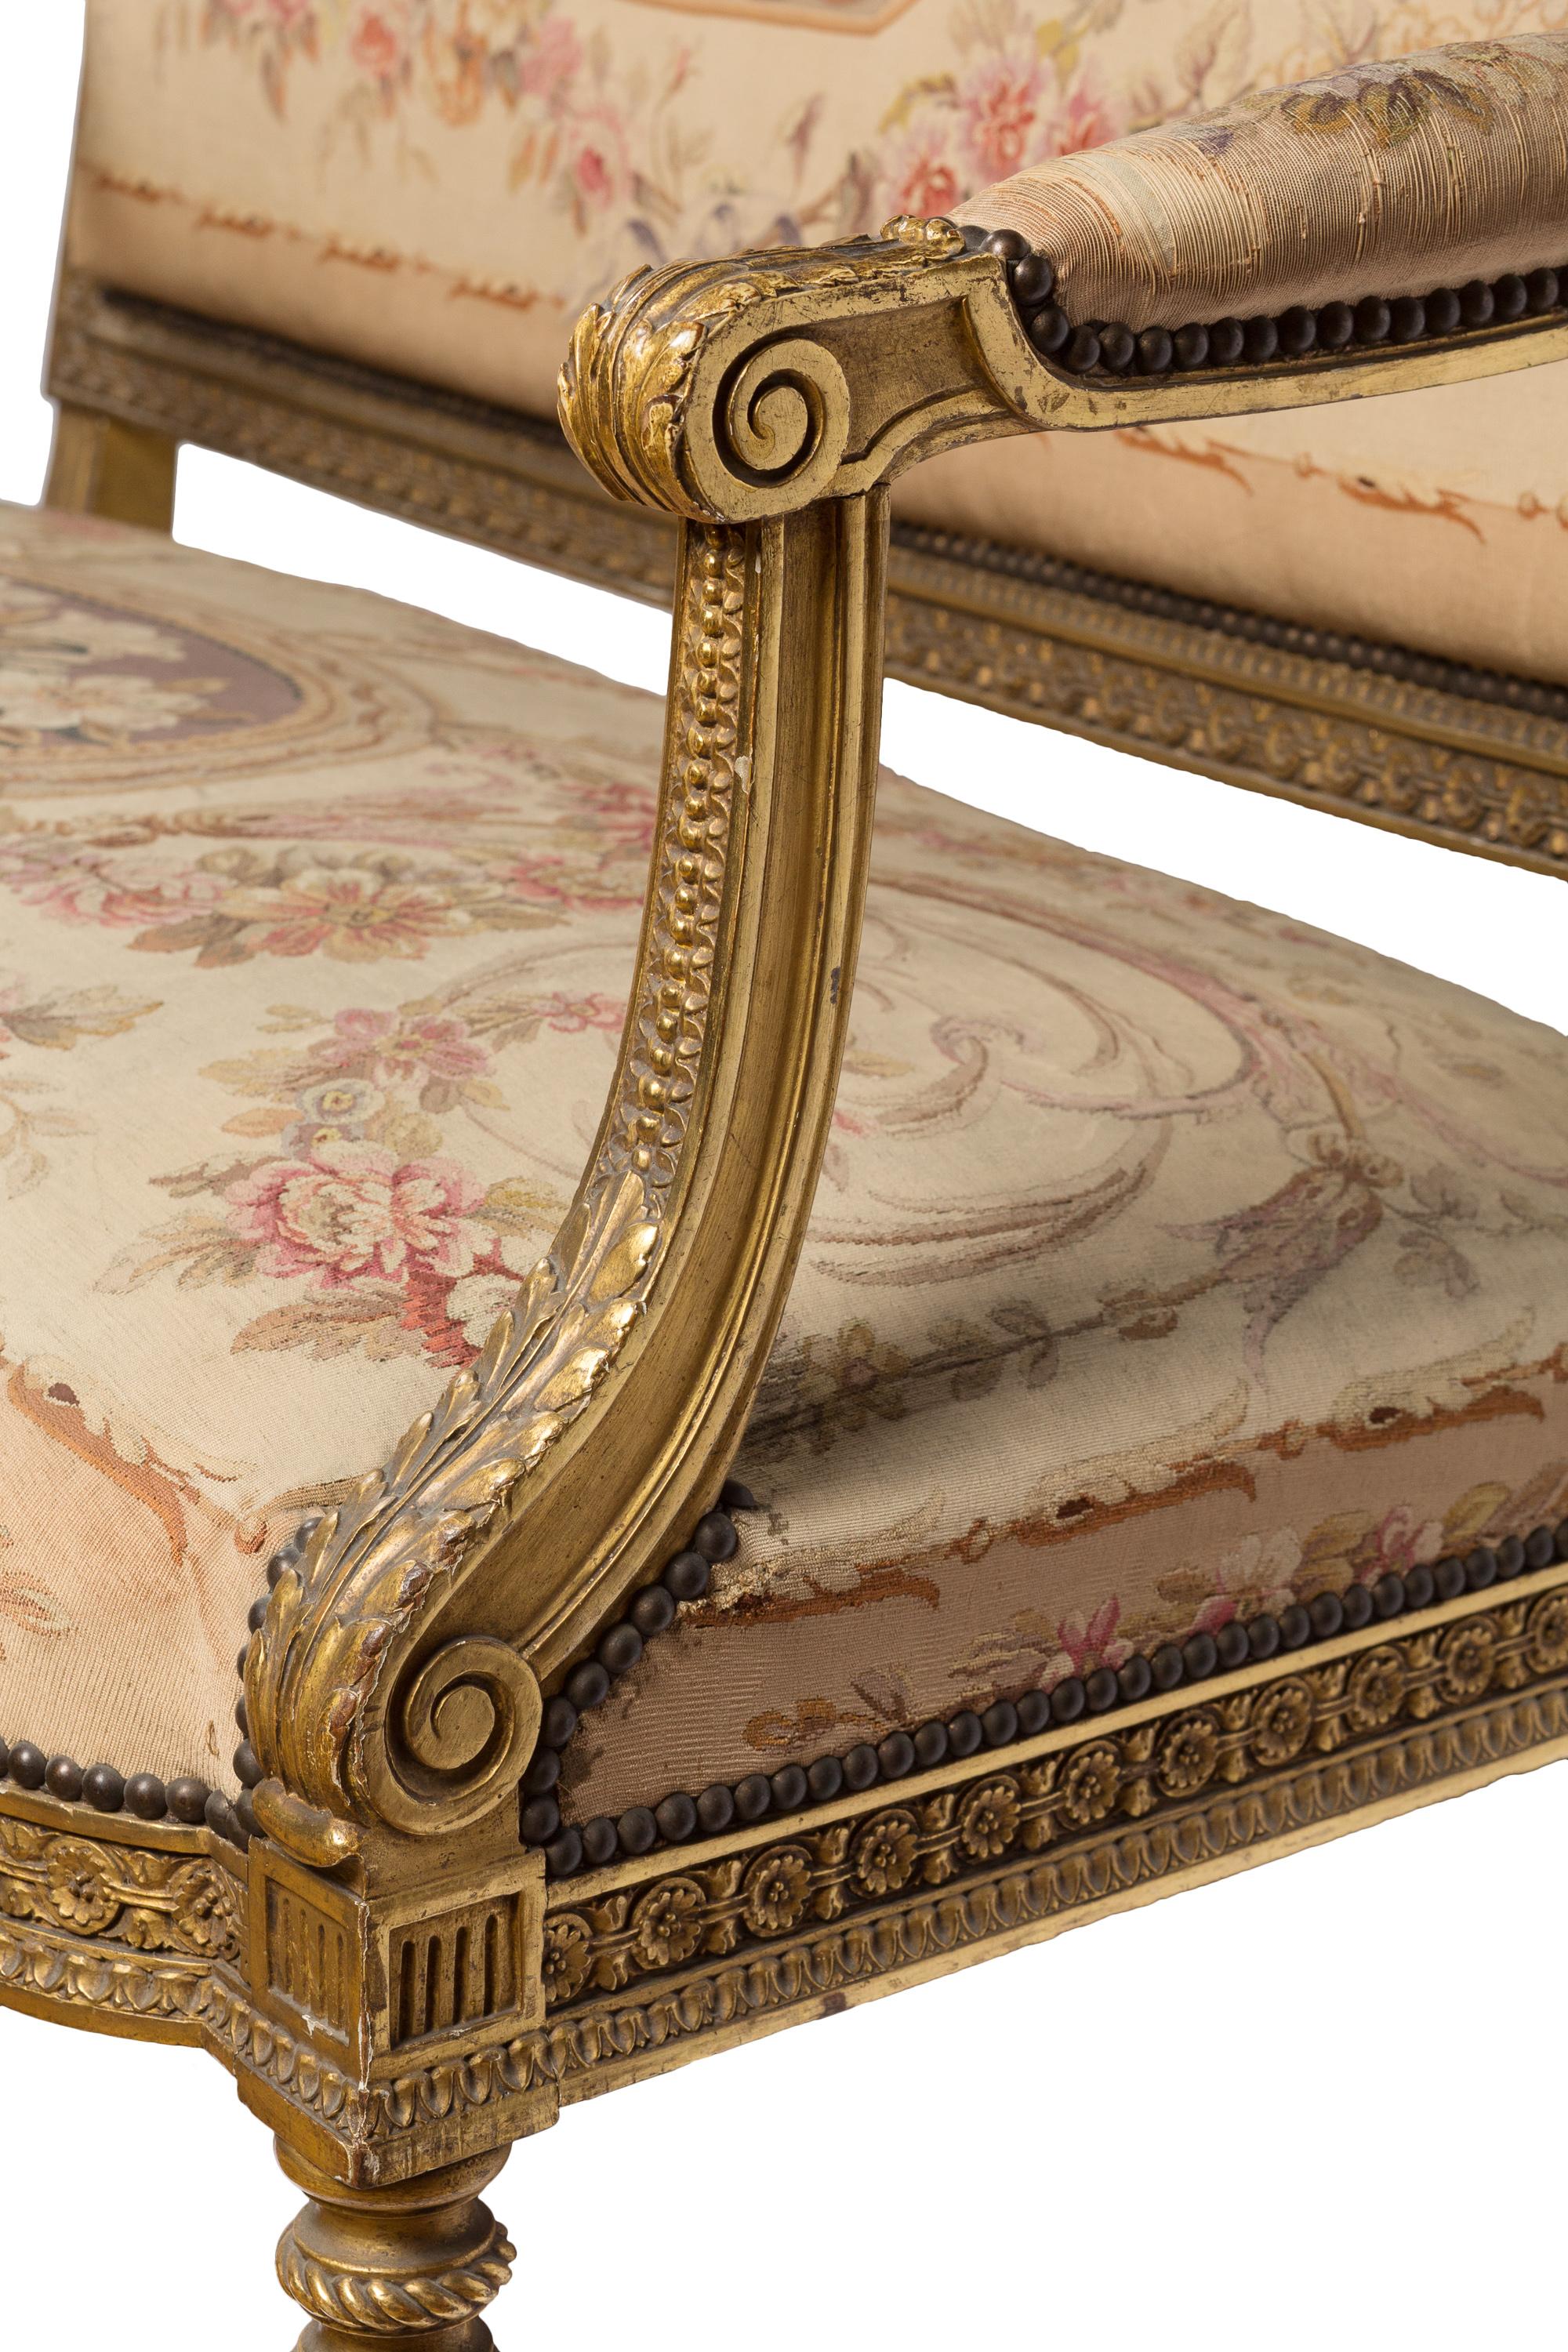 Carved Antique Louis XVI Style 5 Piece Salon Suite, Sofa, 4 Chairs, Aubusson Upholstery For Sale